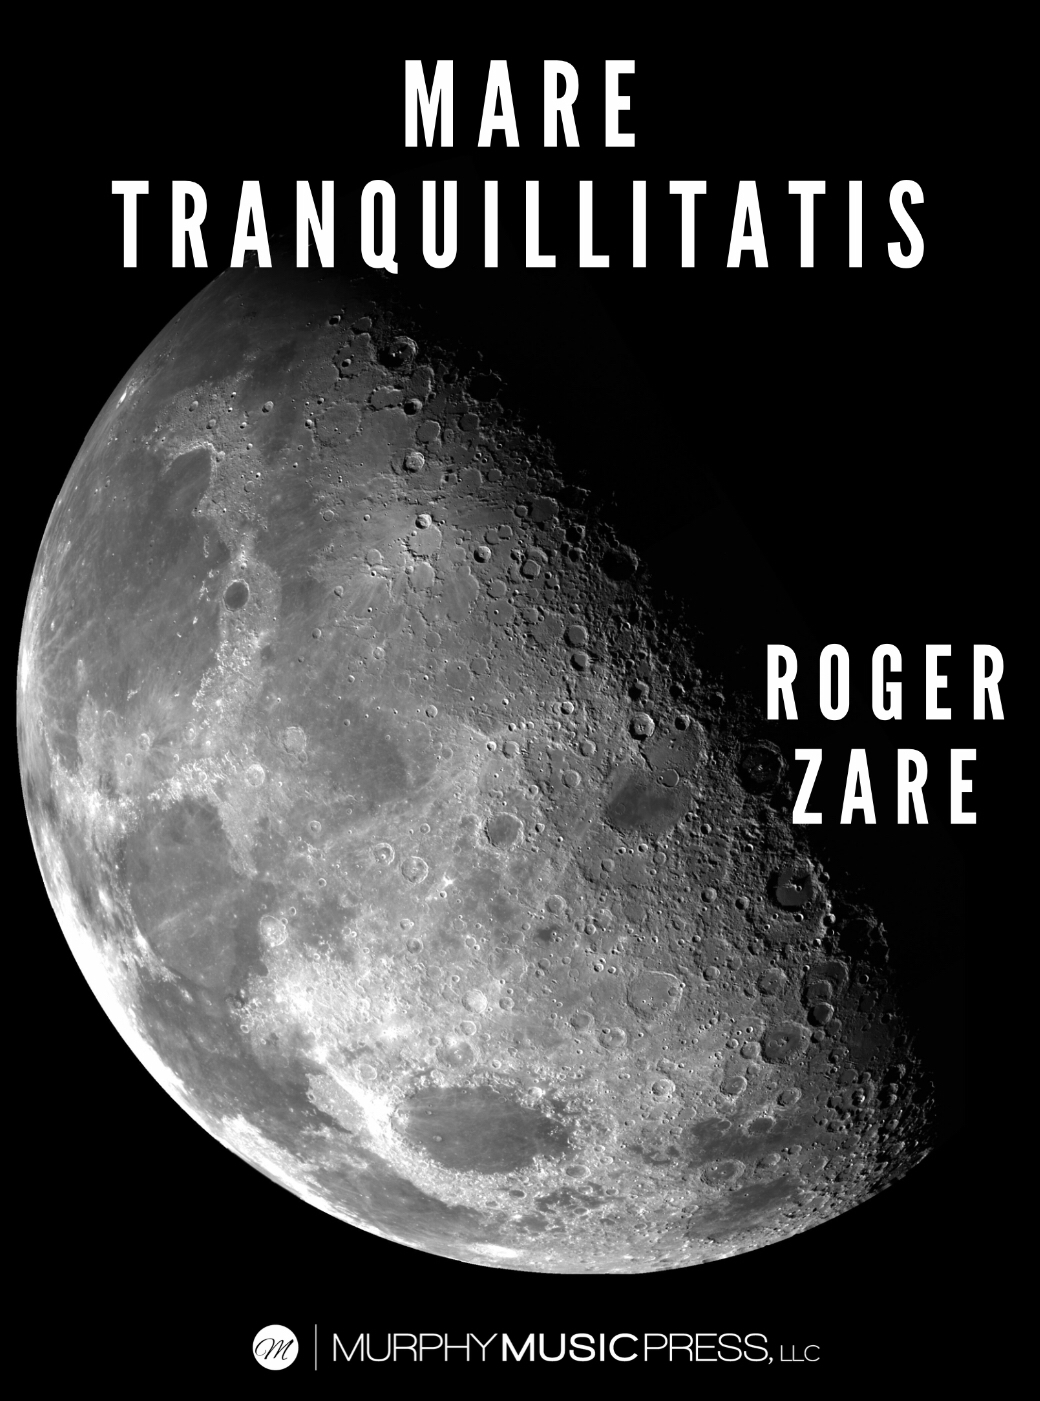 Mare Tranquillitatis by Roger Zare